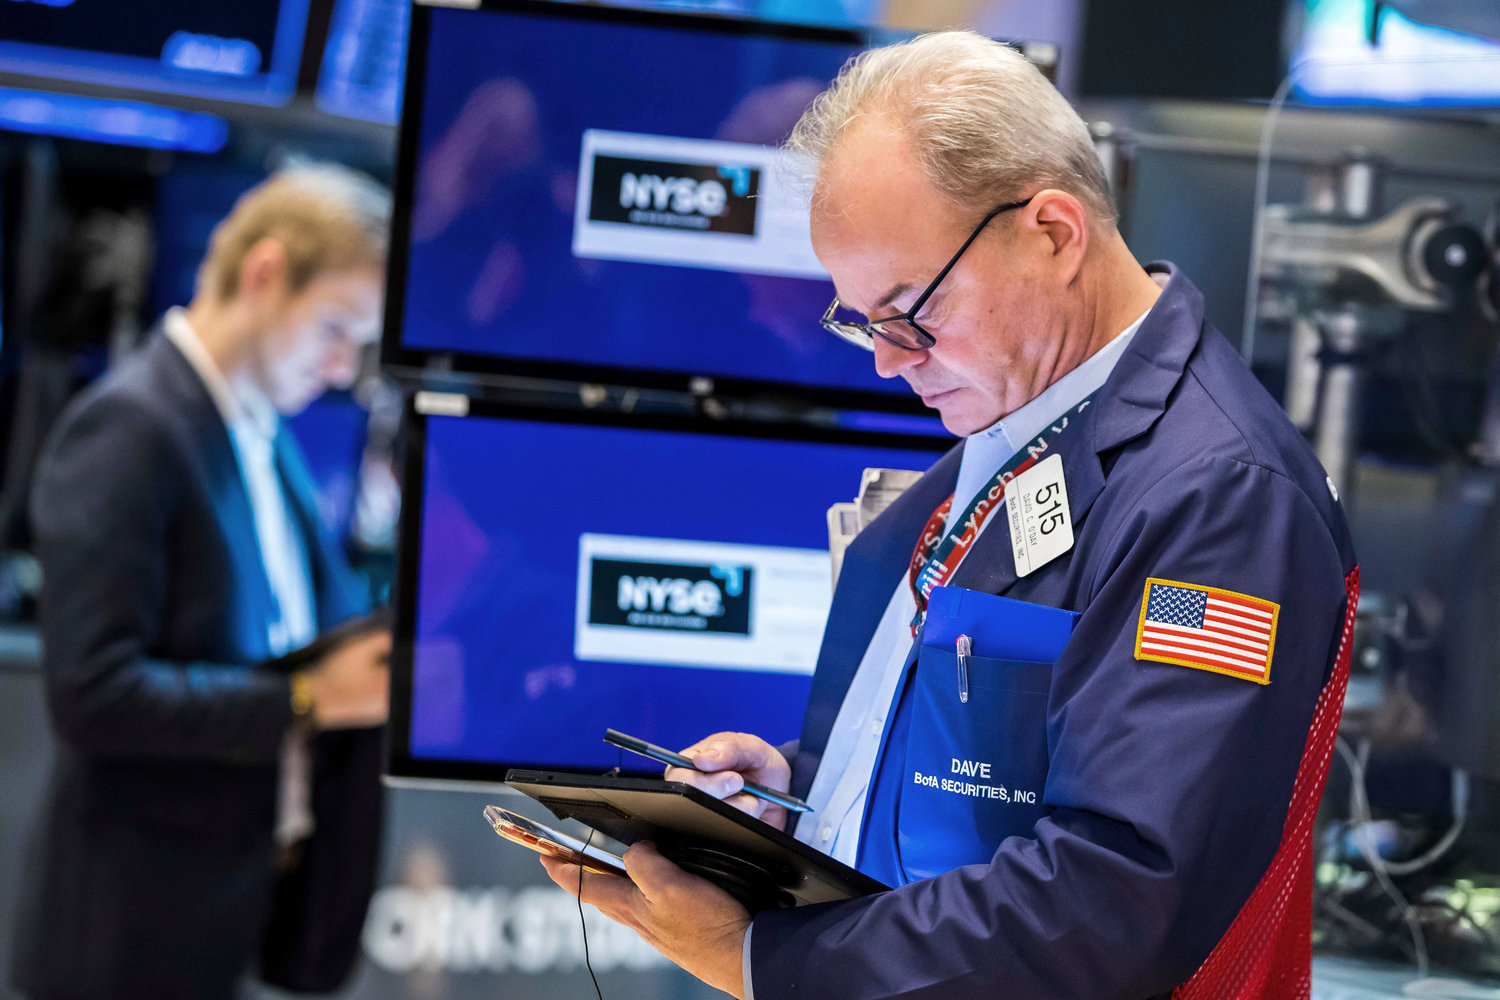 In this photo provided by the New York Stock Exchange, trader David O'Day, right, works on the floor, Thursday, March 31, 2022. Stocks edged lower in midday trading on Wall Street Thursday and oil prices fell as President Joe Biden ordered the release of up to 1 million barrels of oil per day from the nation's strategic petroleum reserve. (Courtney Crow/New York Stock Exchange via AP)